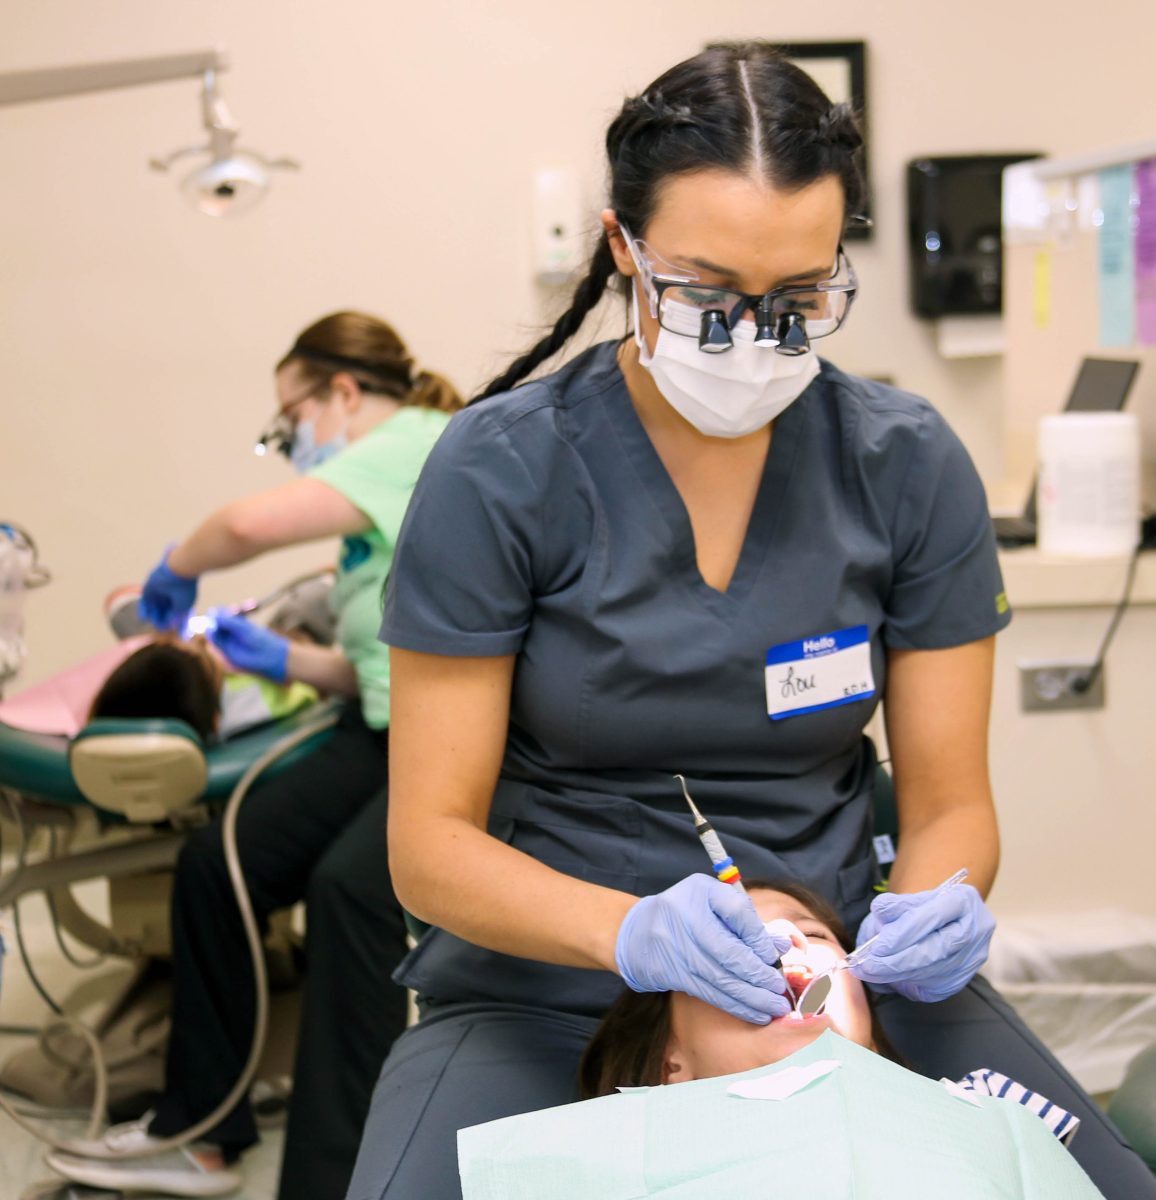 Blinn%26%238217%3Bs+dental+hygiene+program+offers+dental+services+to+the+public+for+%2420+at+its+clinic+in+Bryan.